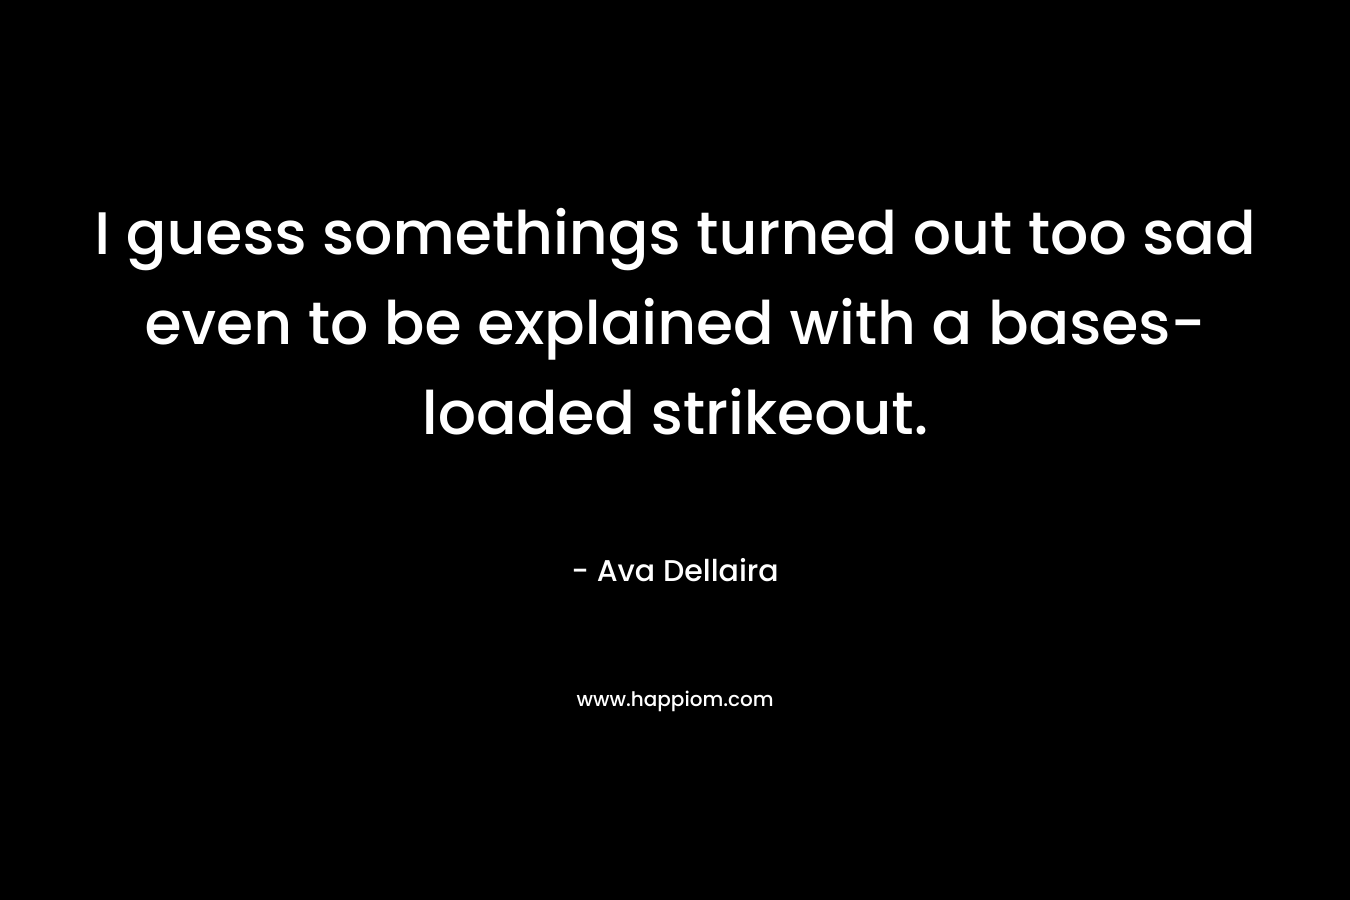 I guess somethings turned out too sad even to be explained with a bases-loaded strikeout. – Ava Dellaira